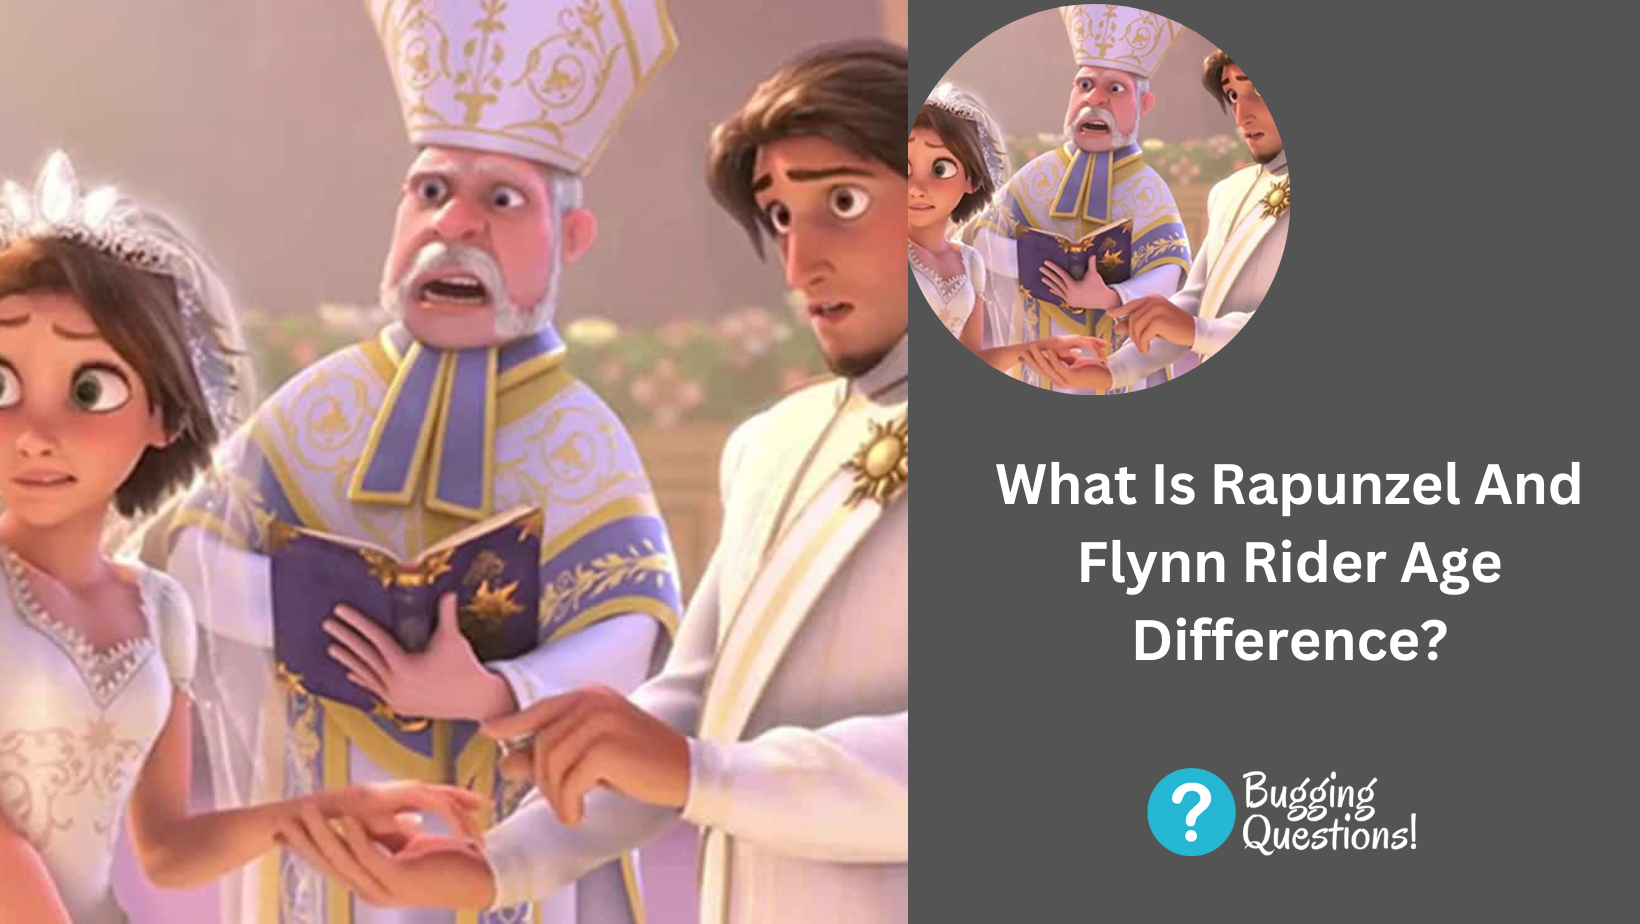 What Is Rapunzel And Flynn Rider Age Difference?